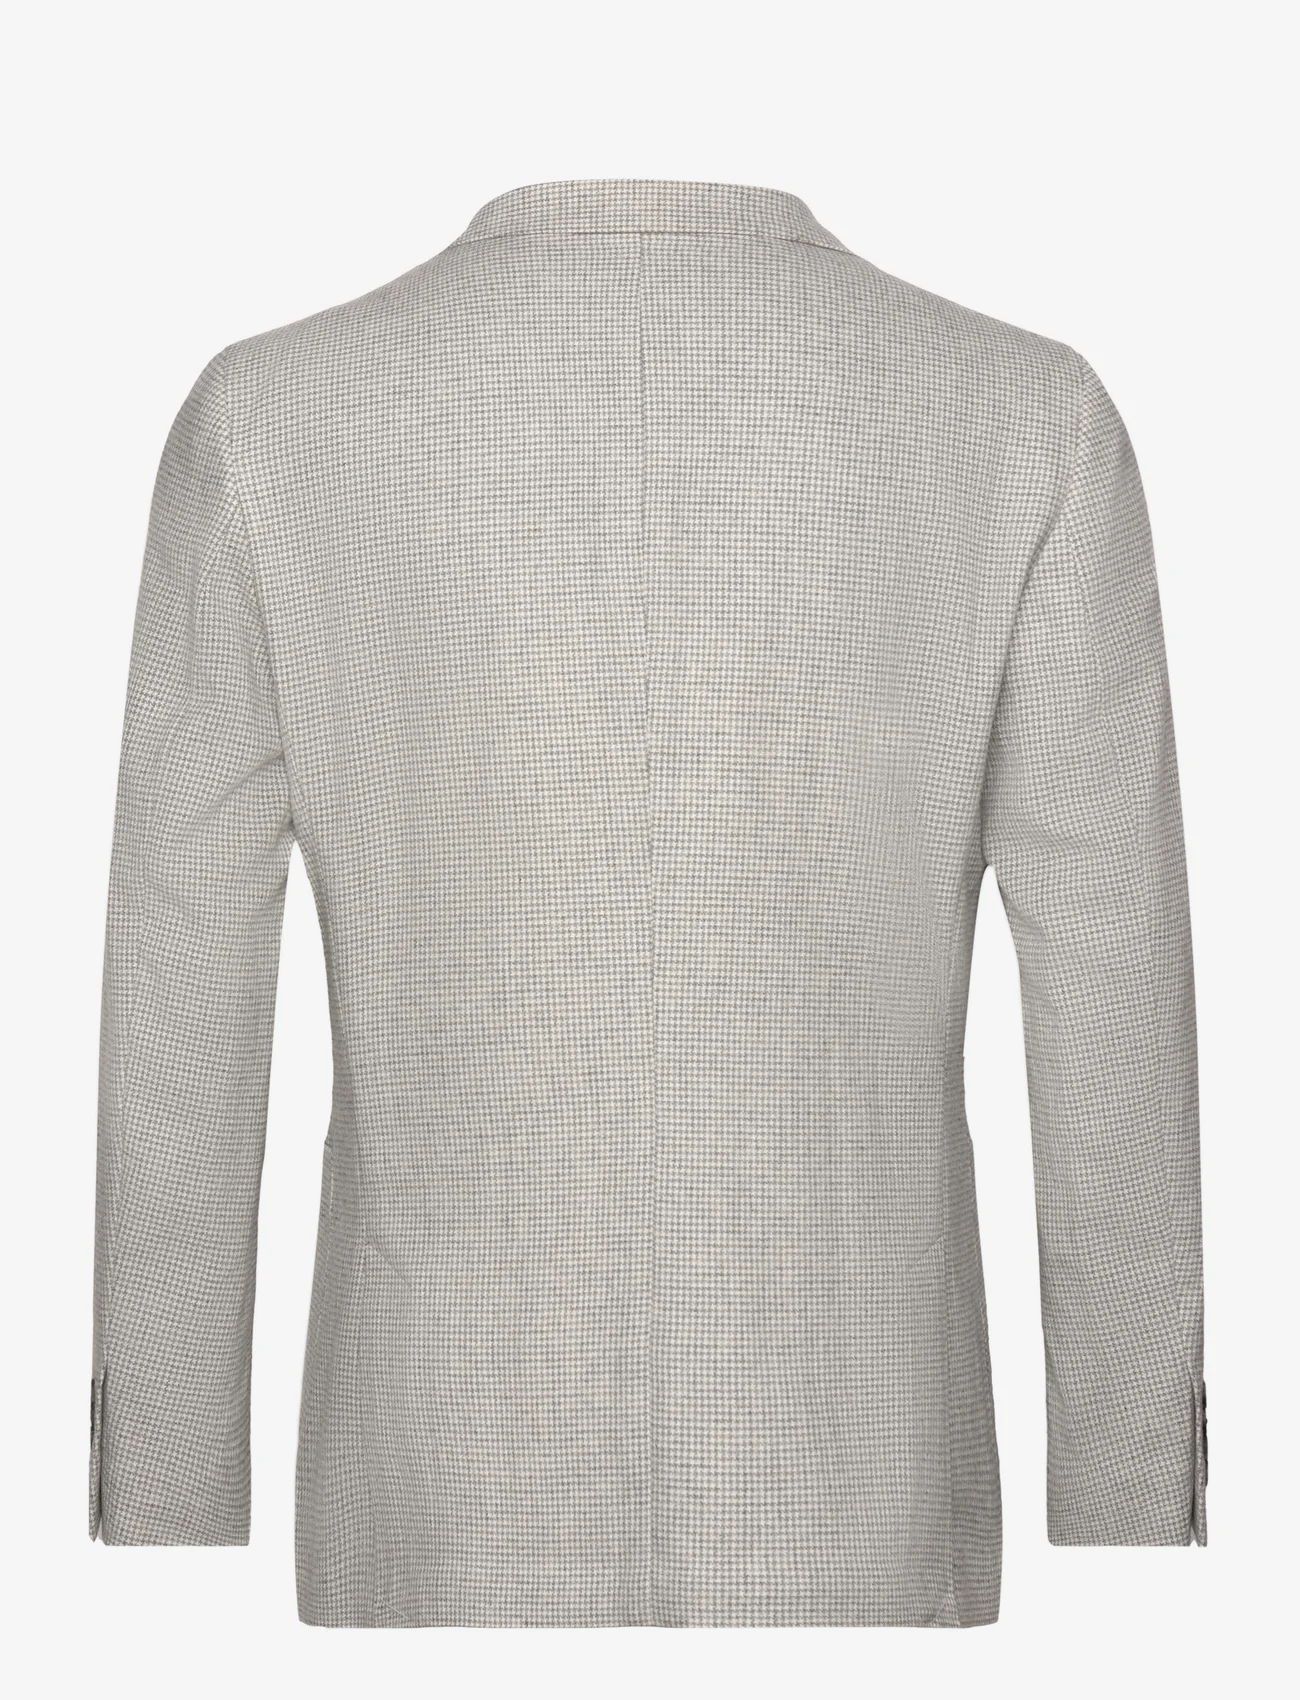 Reiss - FLOCK - double breasted blazers - soft grey - 1